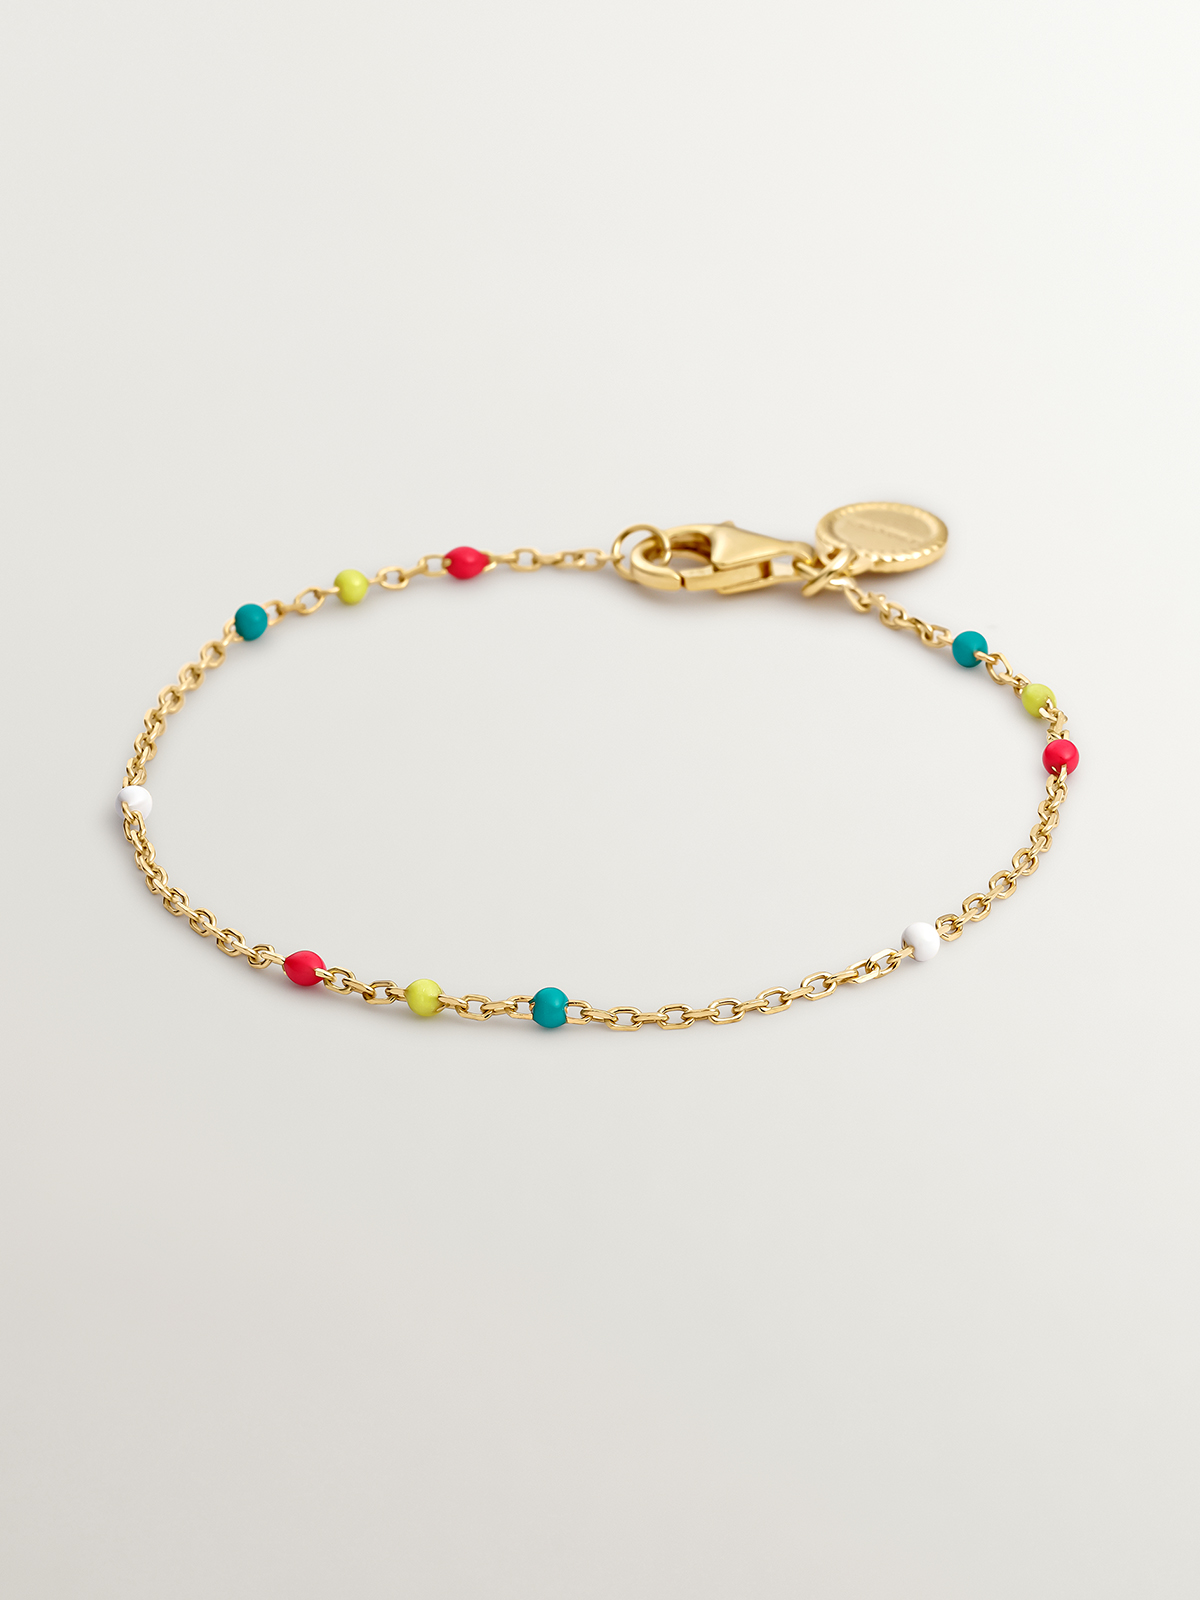 925 Silver bracelet bathed in 18K yellow gold with multicolor enamel